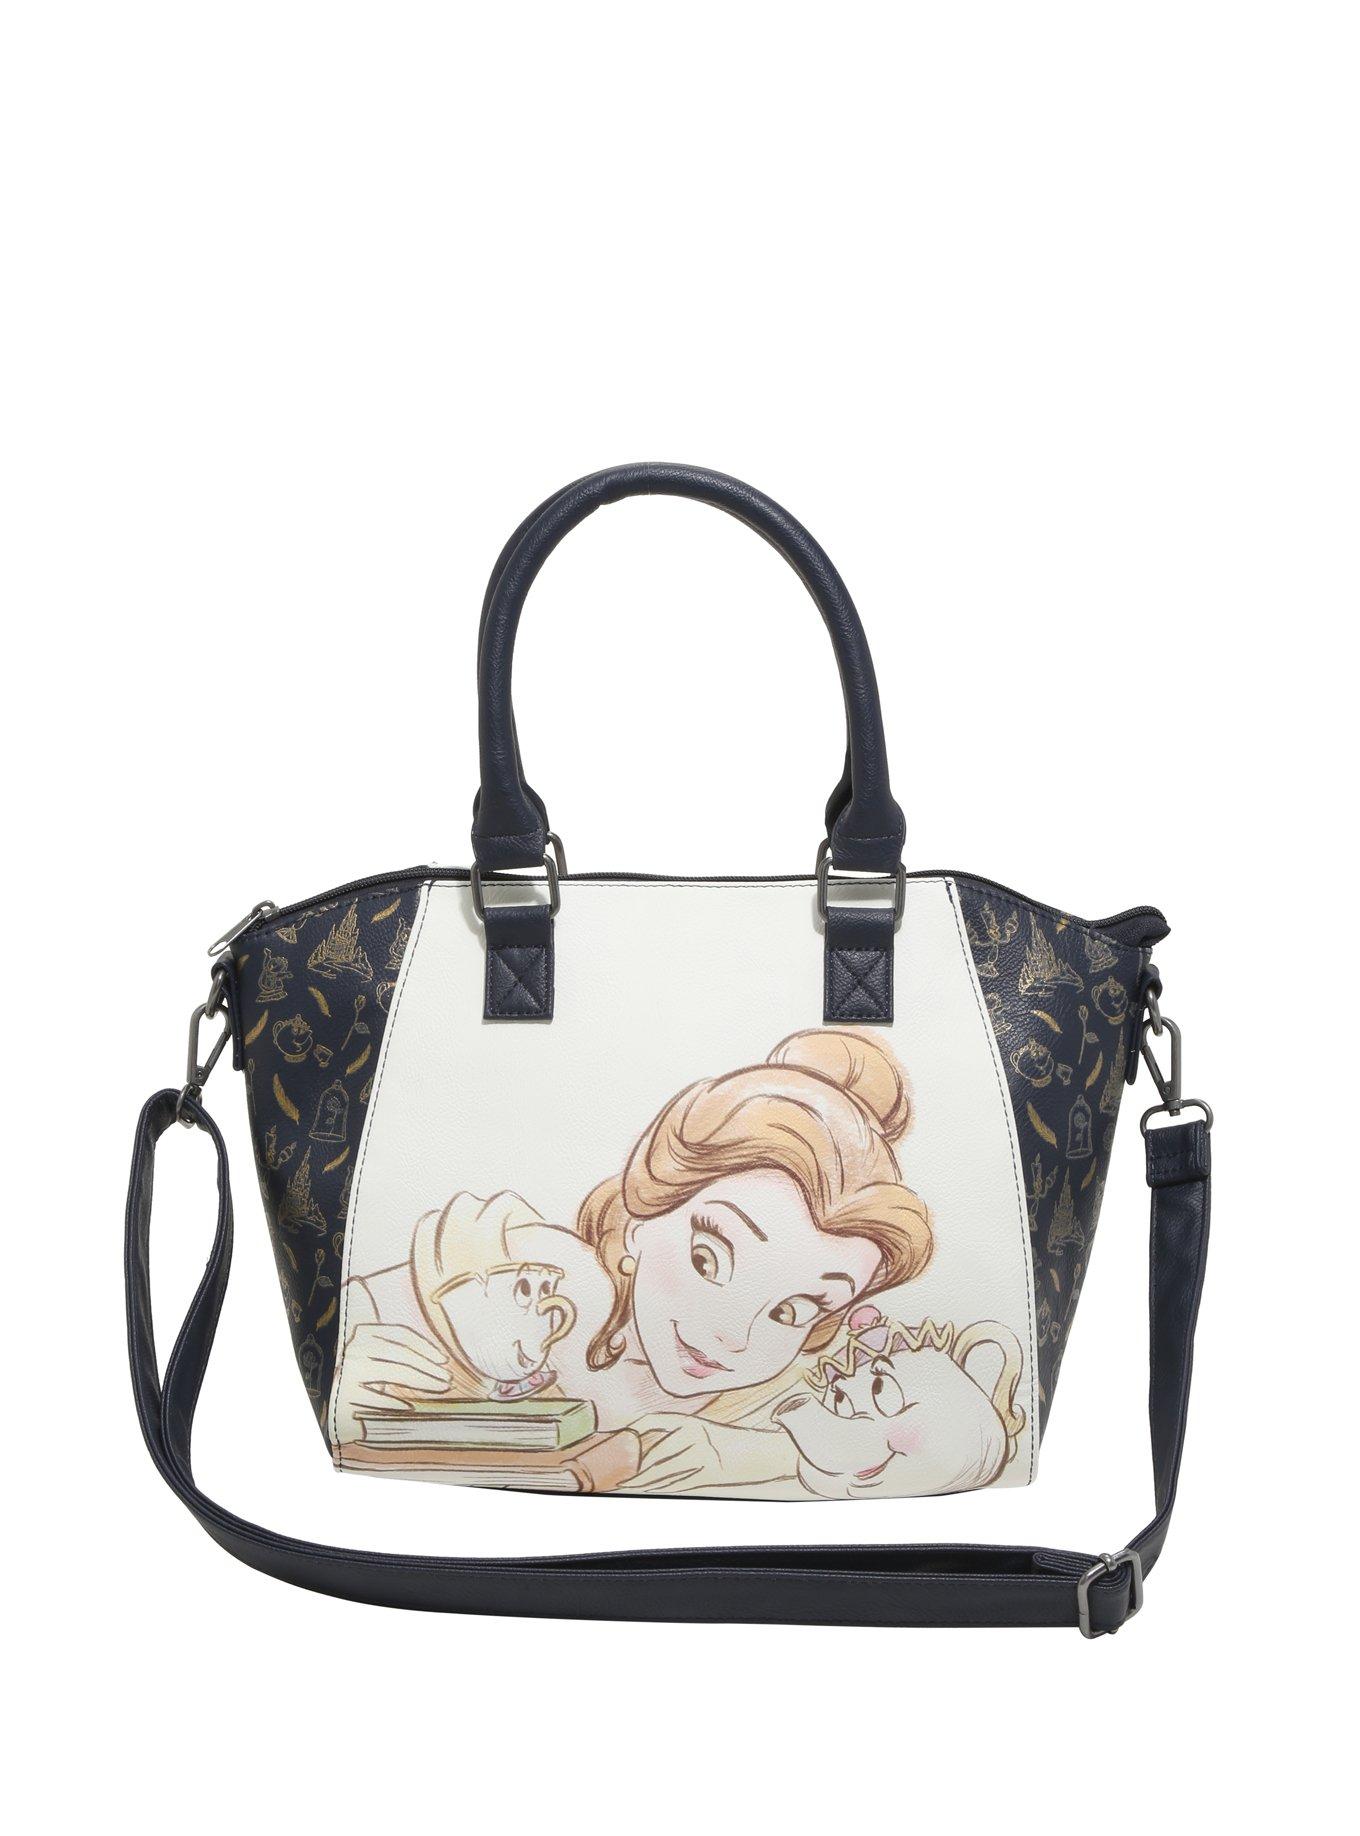 Disney Beauty And The Beast Belle Mrs. Potts & Chip Satchel Bag | Hot Topic